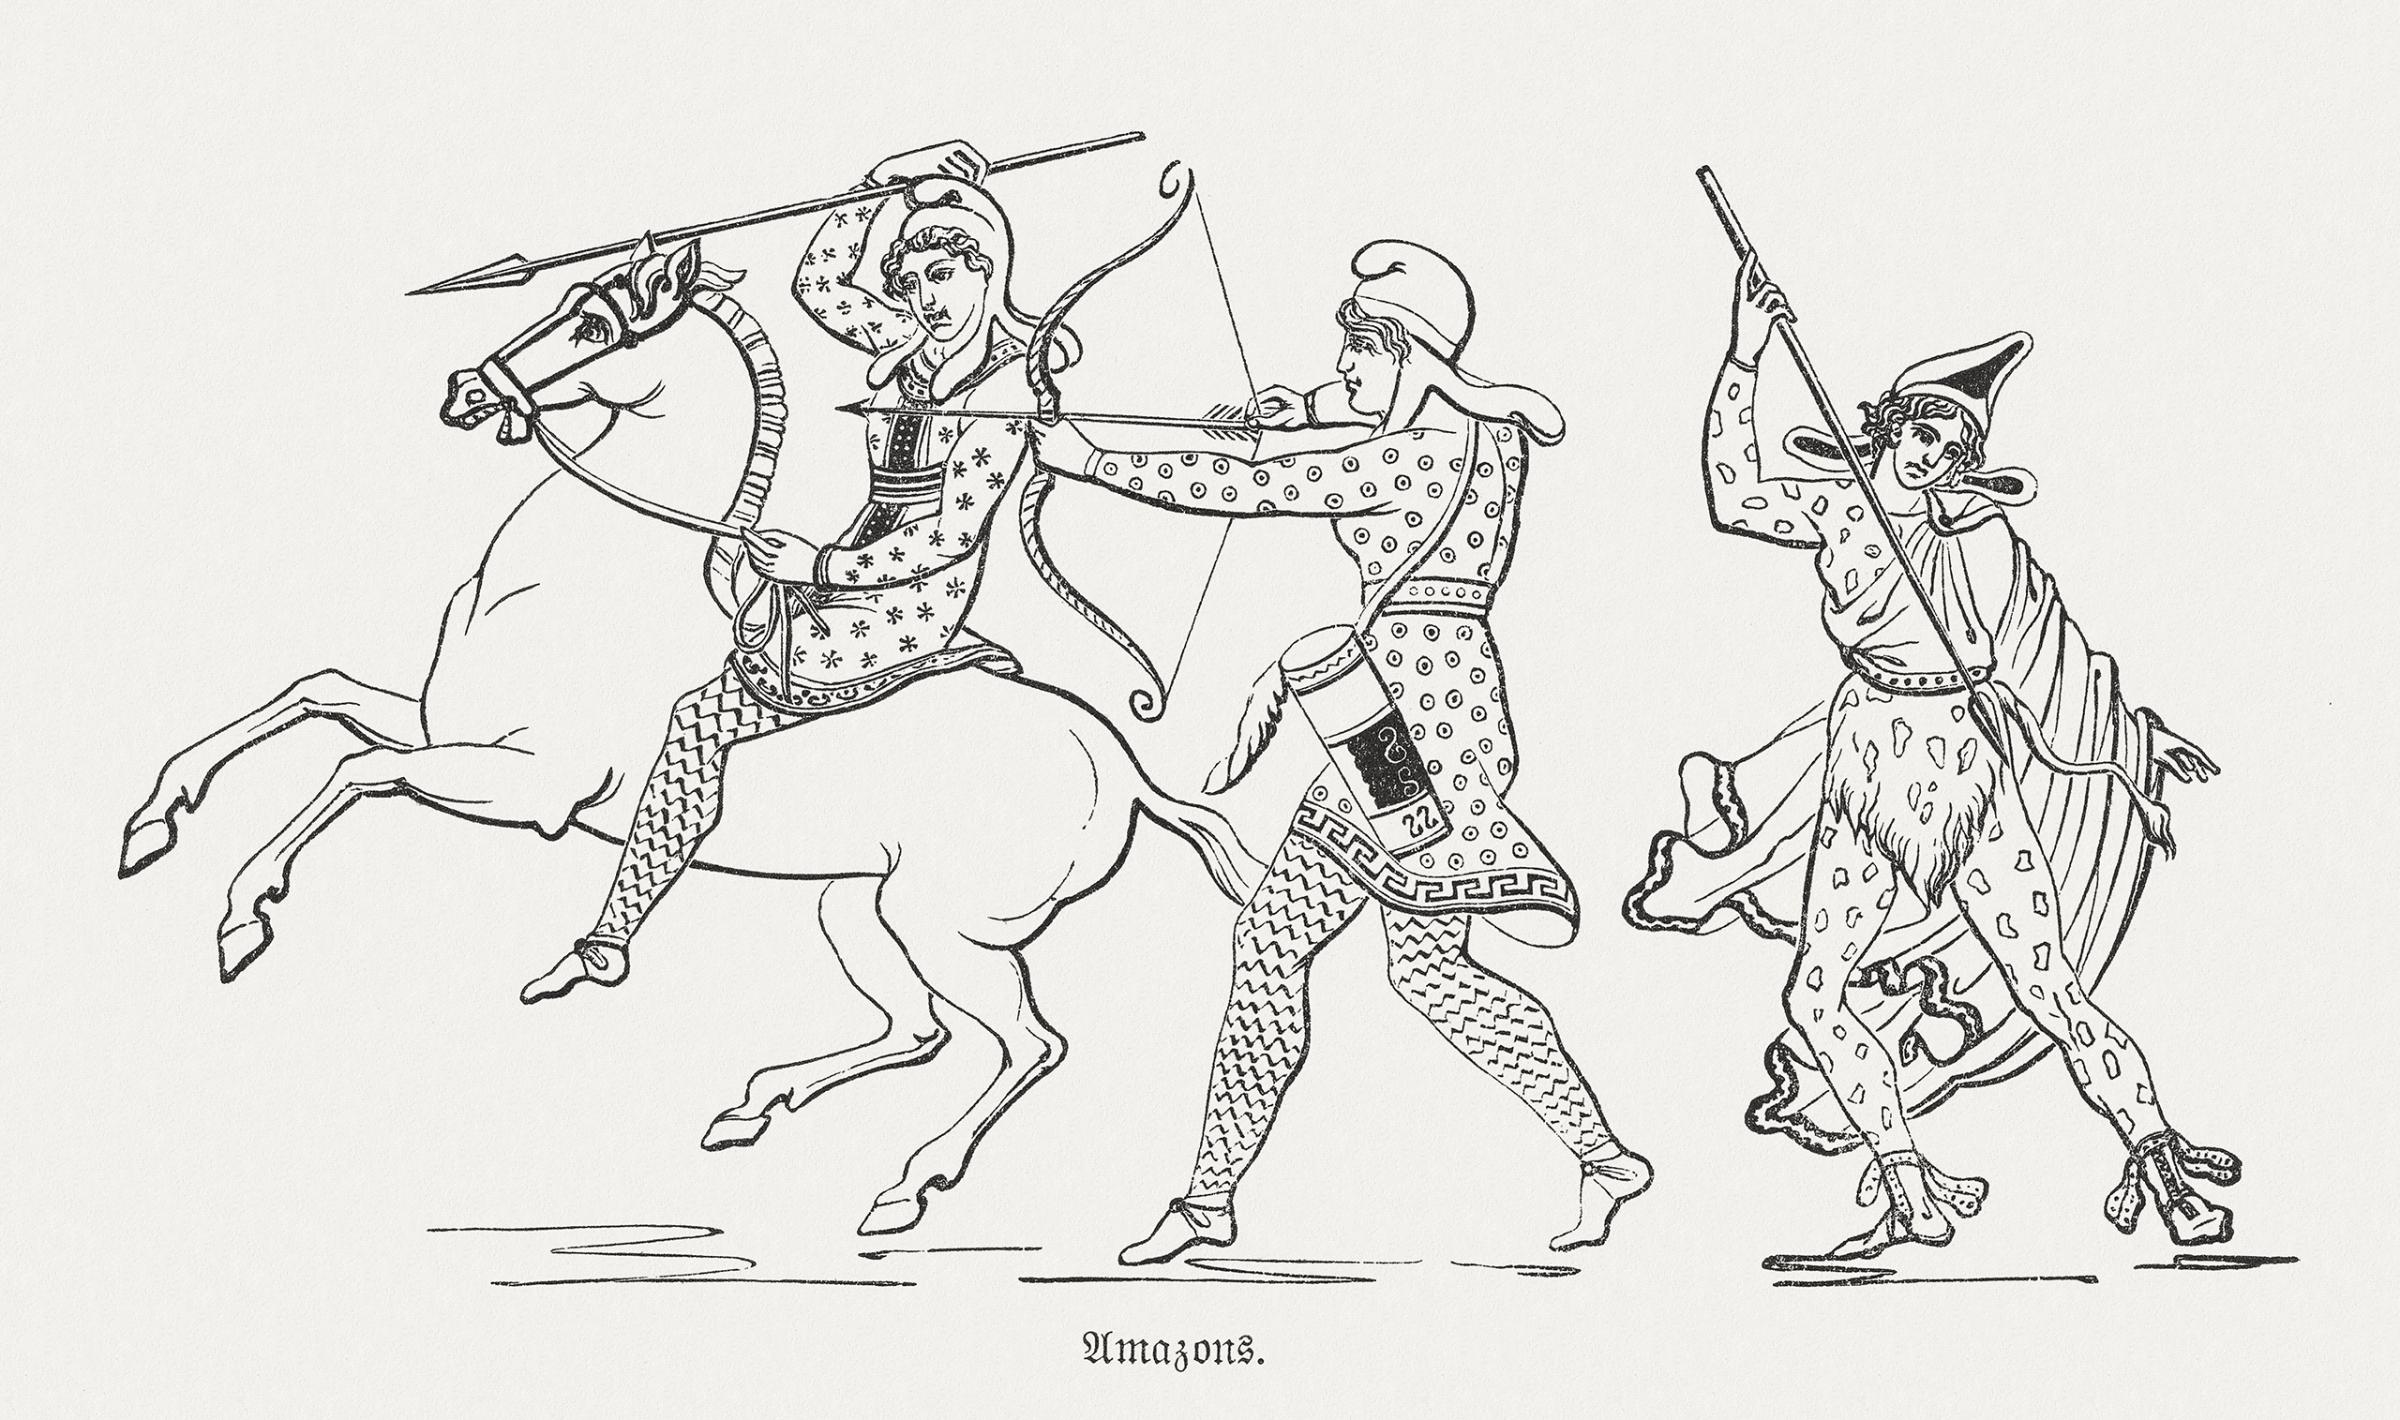 Amazon queen and amazons depicted in a wood engraving, 1880.